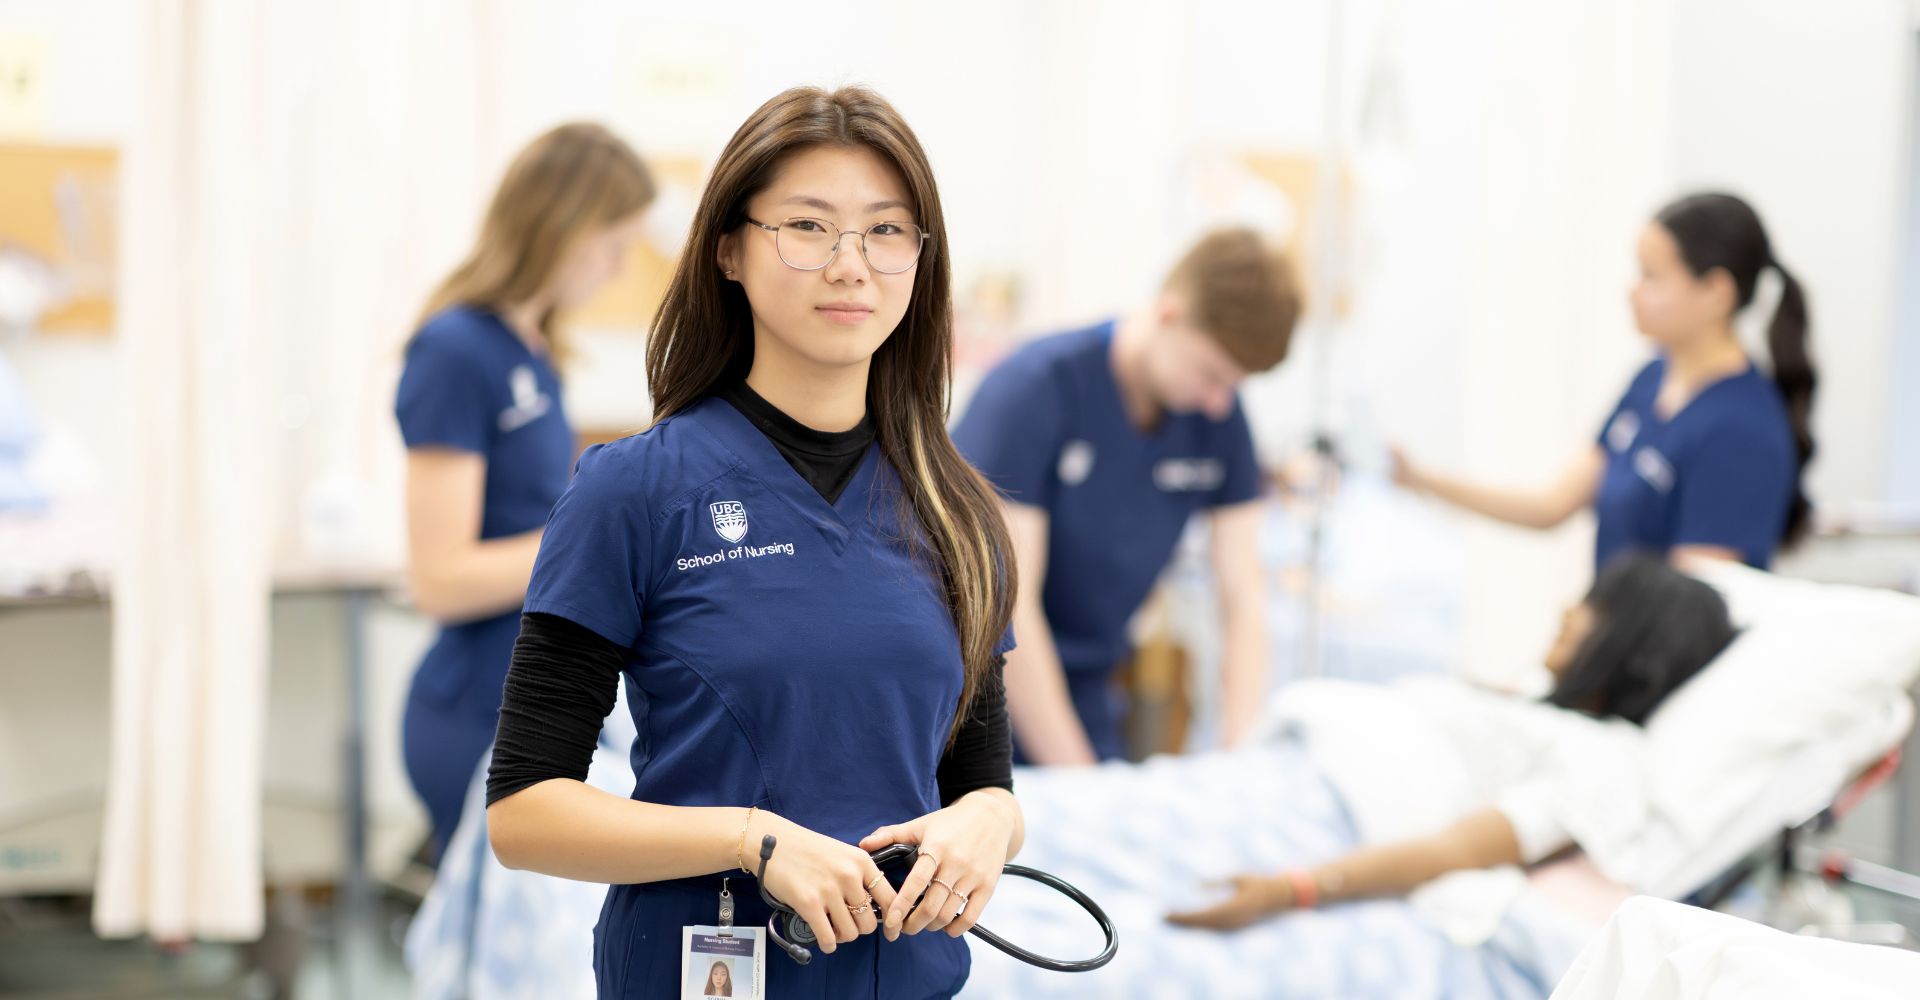 Nursing student holding stethoscope in front of other students